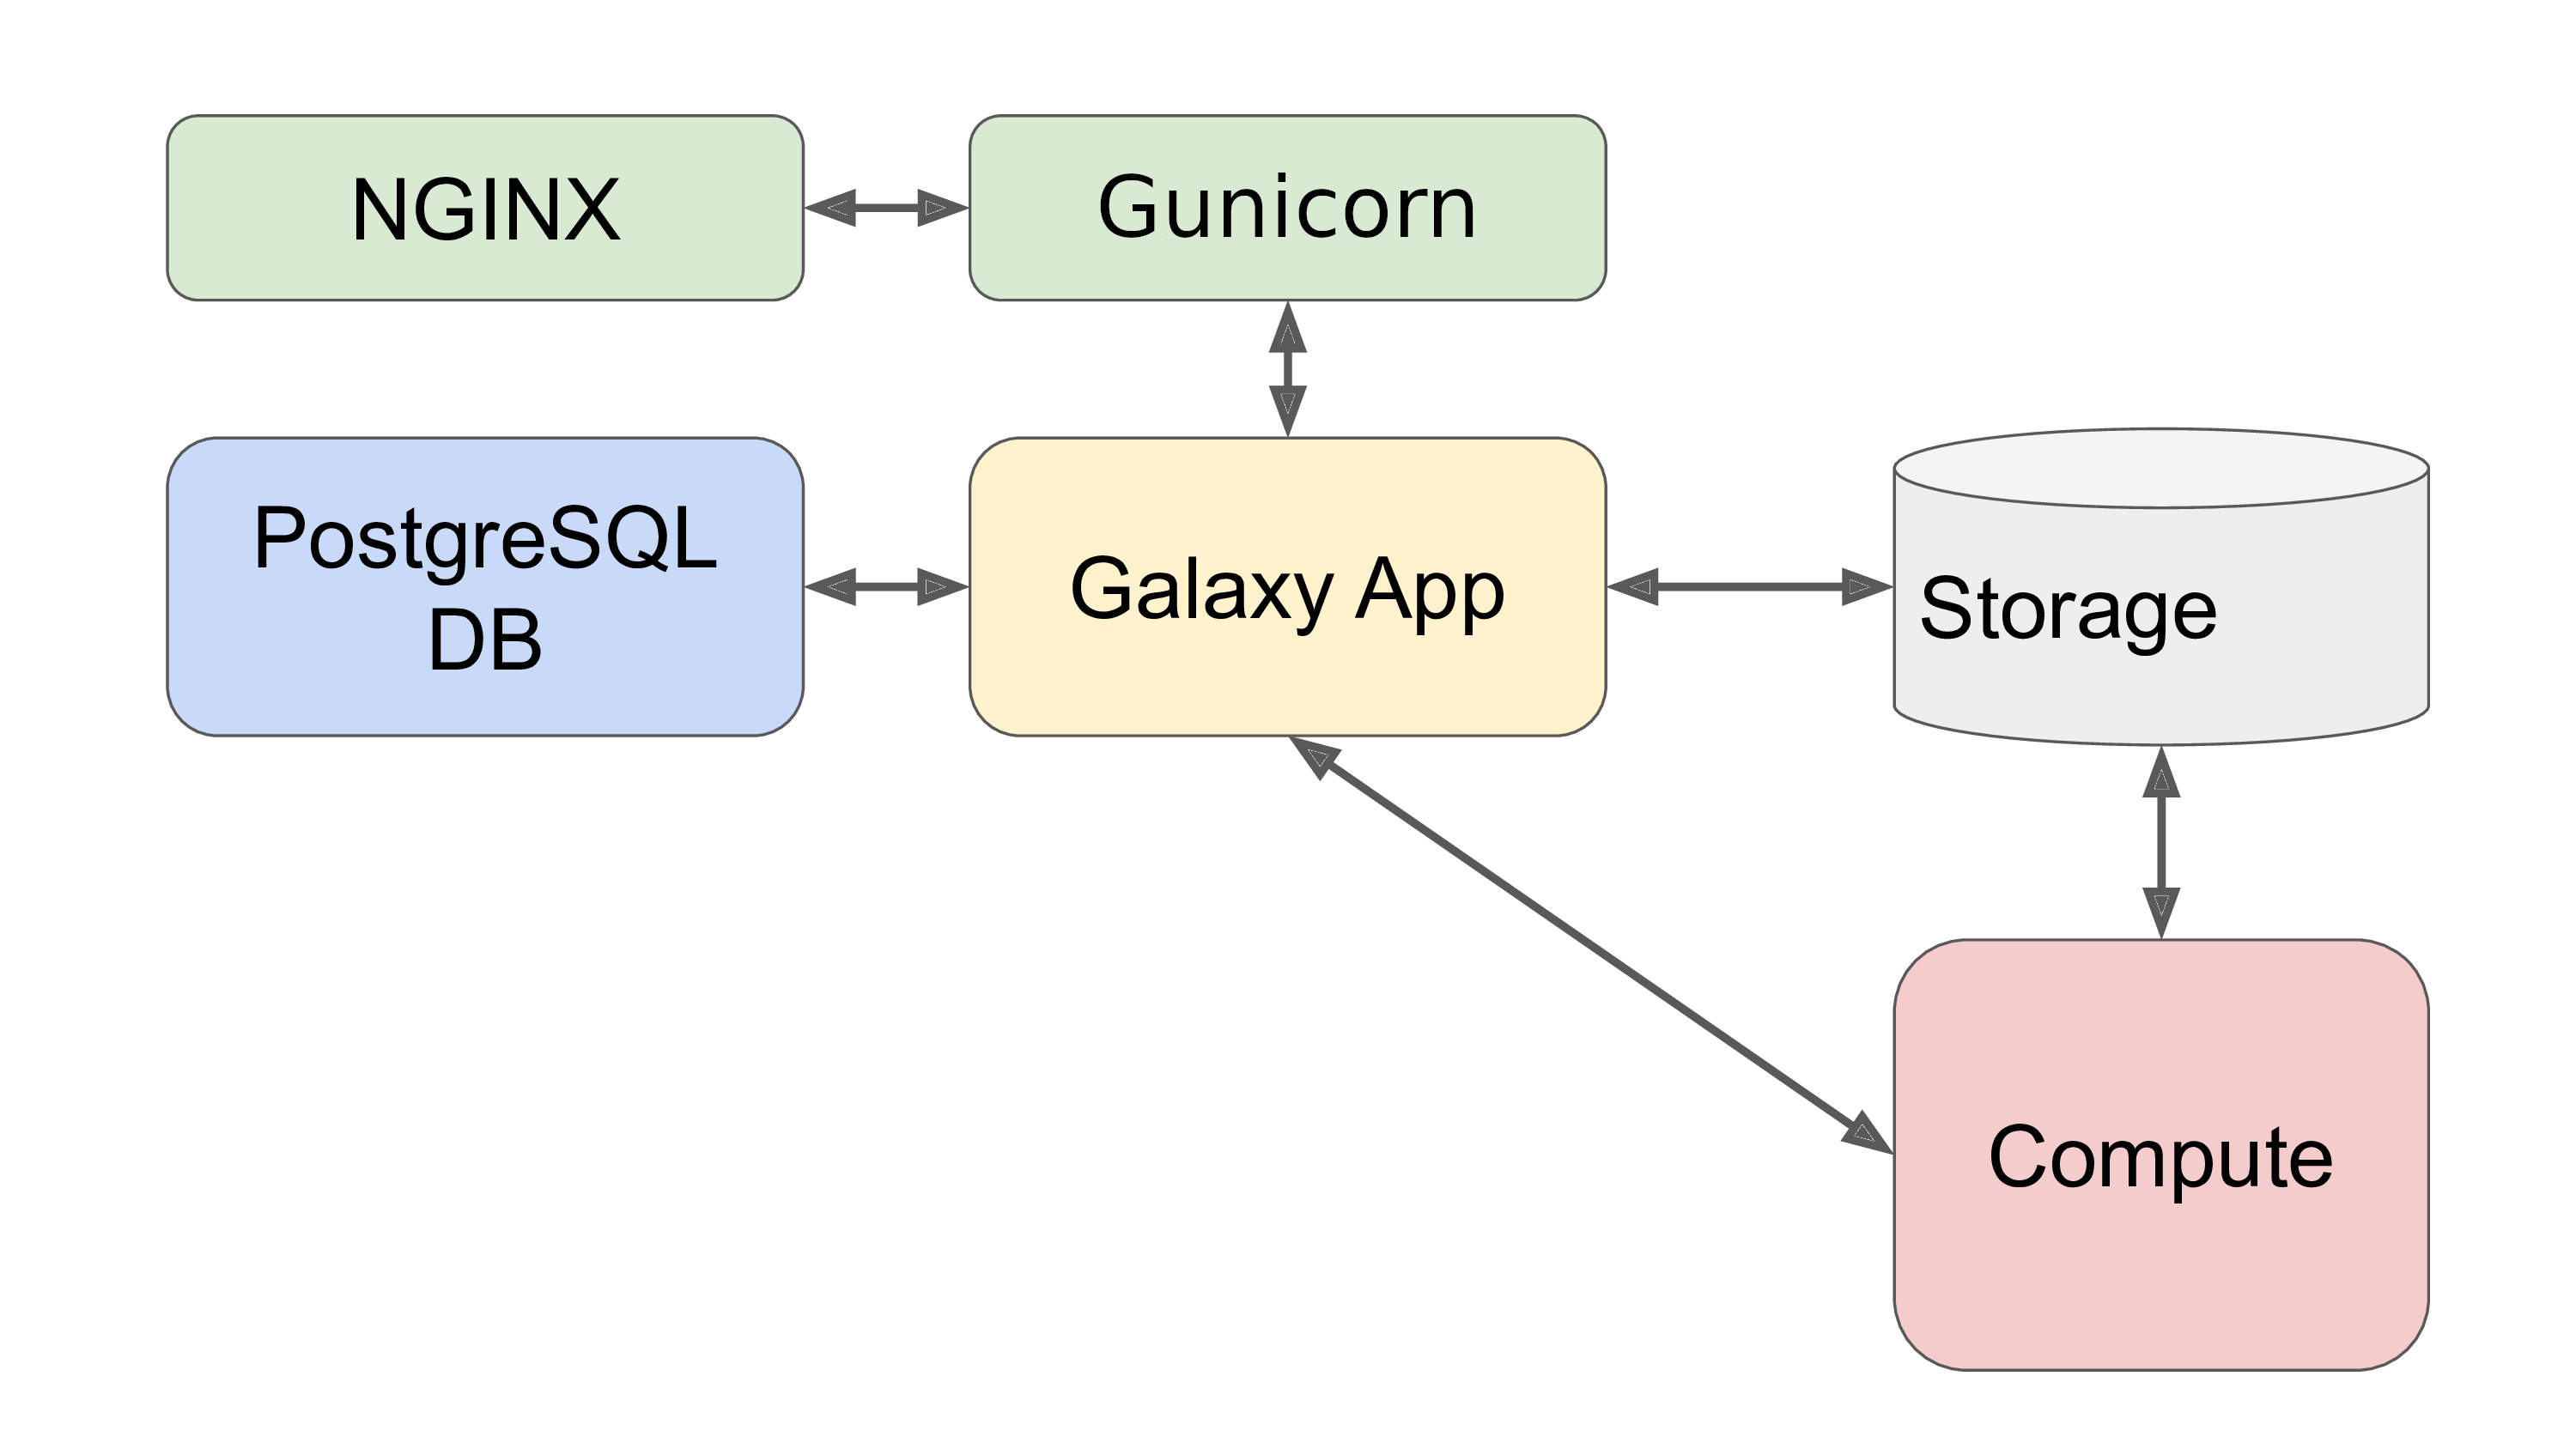 diagram of galaxy setup with postgres, galaxy, nginx, gunicorn, storage, and compute shown attached to each other.